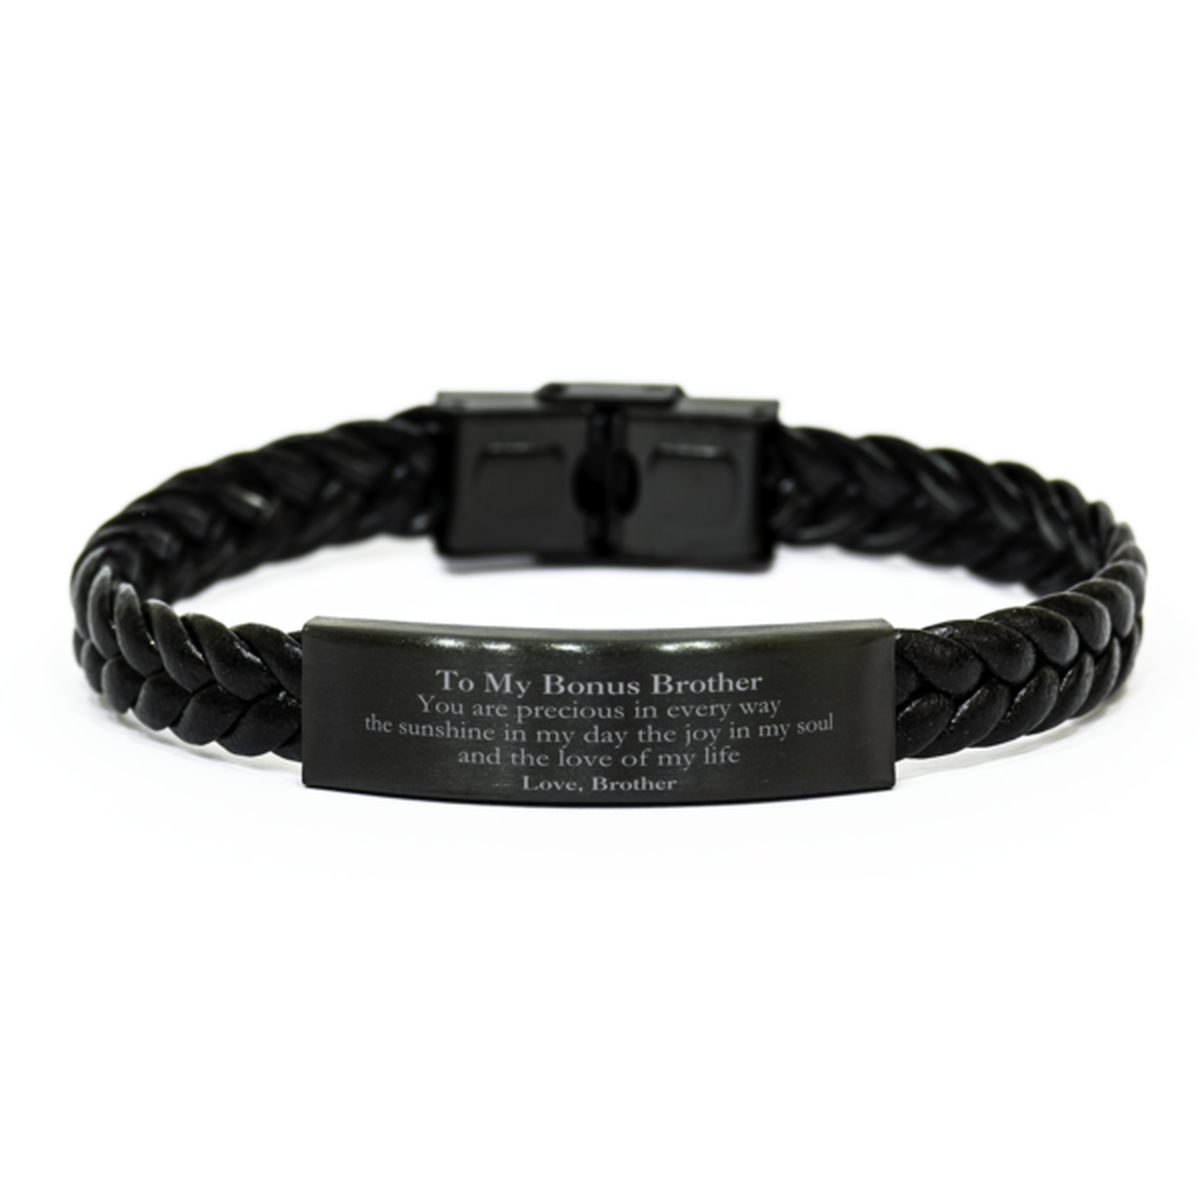 Graduation Gifts for Bonus Brother Braided Leather Bracelet Present from Brother, Christmas Bonus Brother Birthday Gifts Bonus Brother You are precious in every way the sunshine in my day. Love, Brother